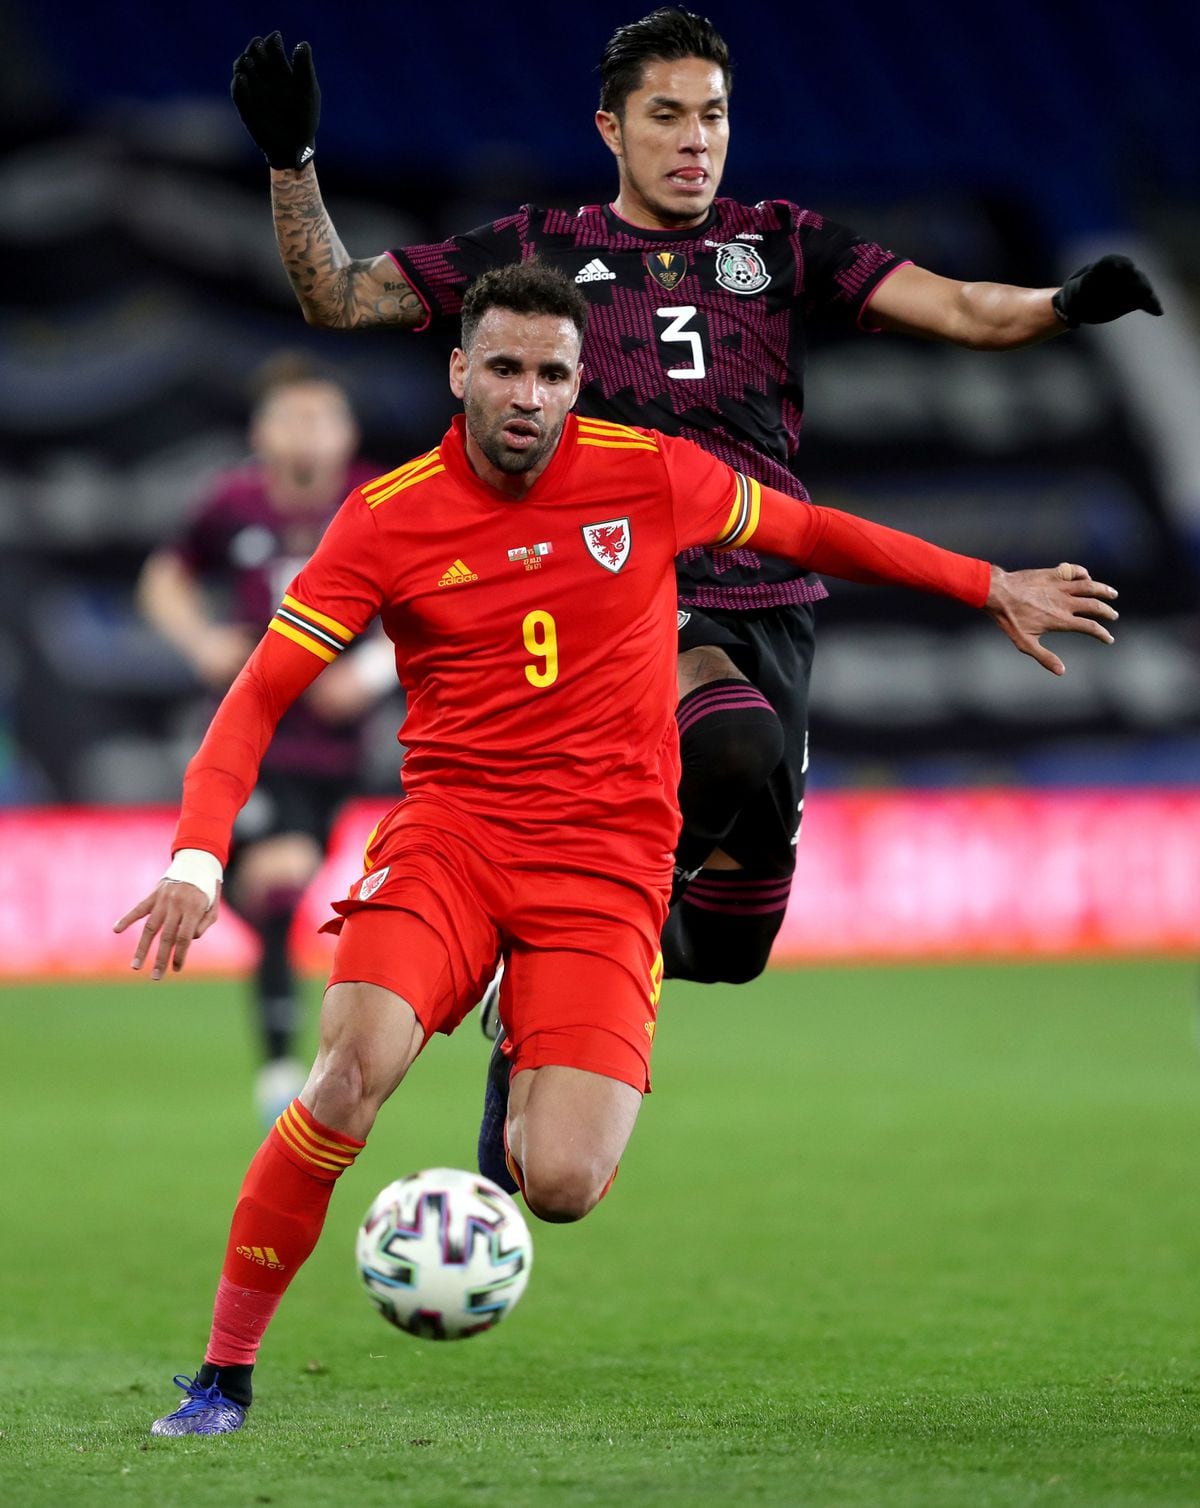 West Brom S Hal Robson Kanu Is Canned For Breaching Wales Rules Express Star